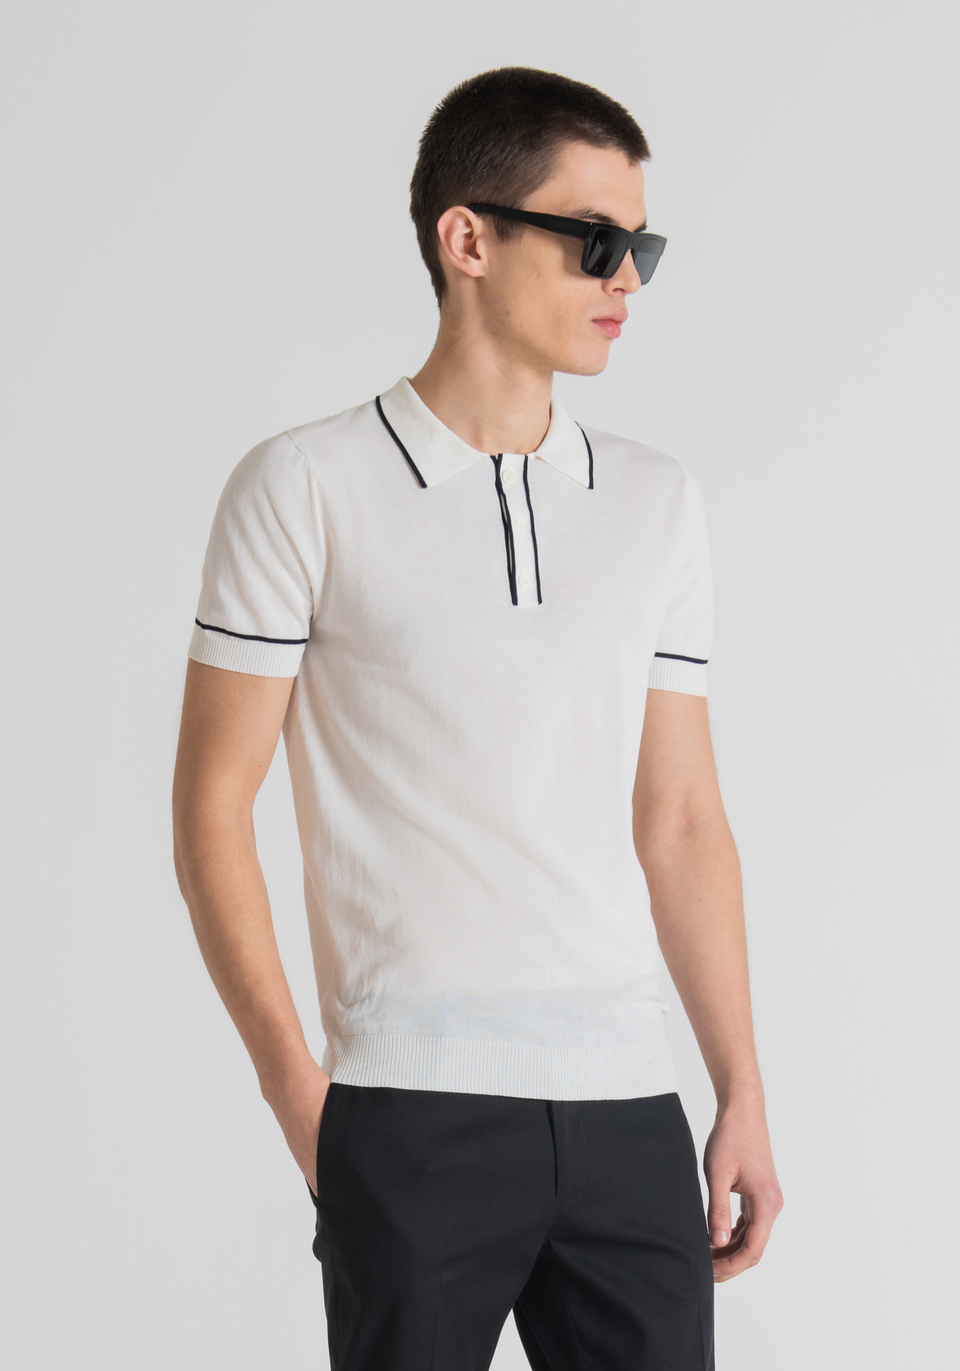 SLIM-FIT PURE COTTON POLO SHIRT WITH CONTRASTING JACQUARD BANDS - Antony Morato Online Shop